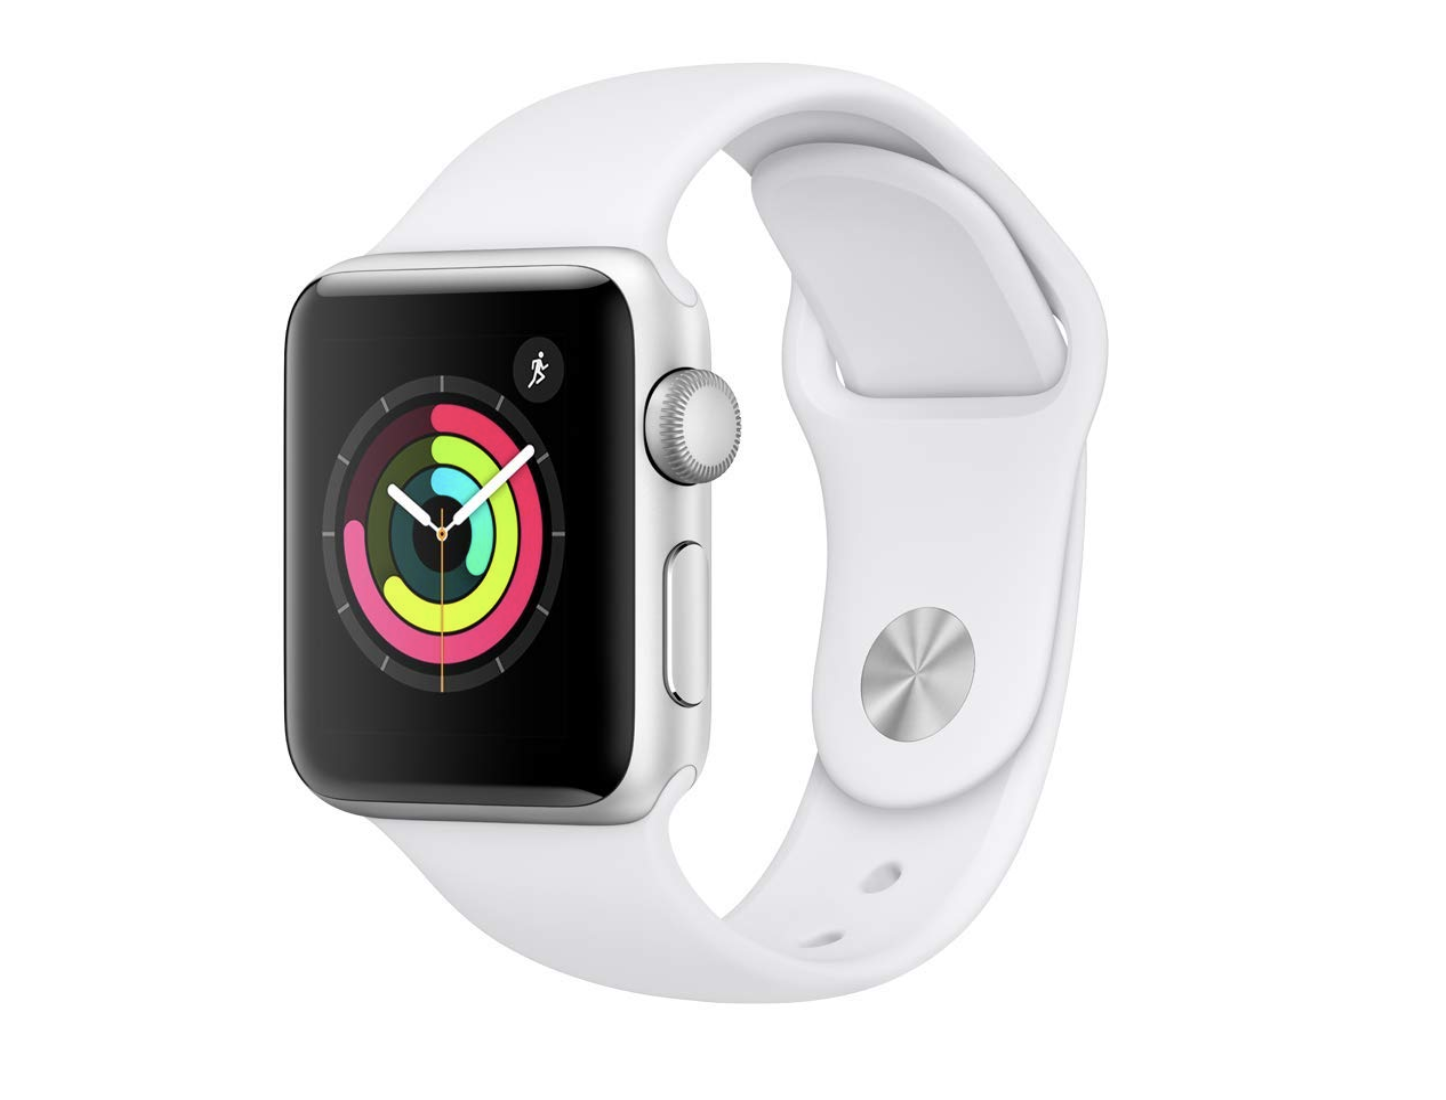 Apple Watch Series 3 (GPS, 38mm) - Silver Aluminium Case With White Sport Band